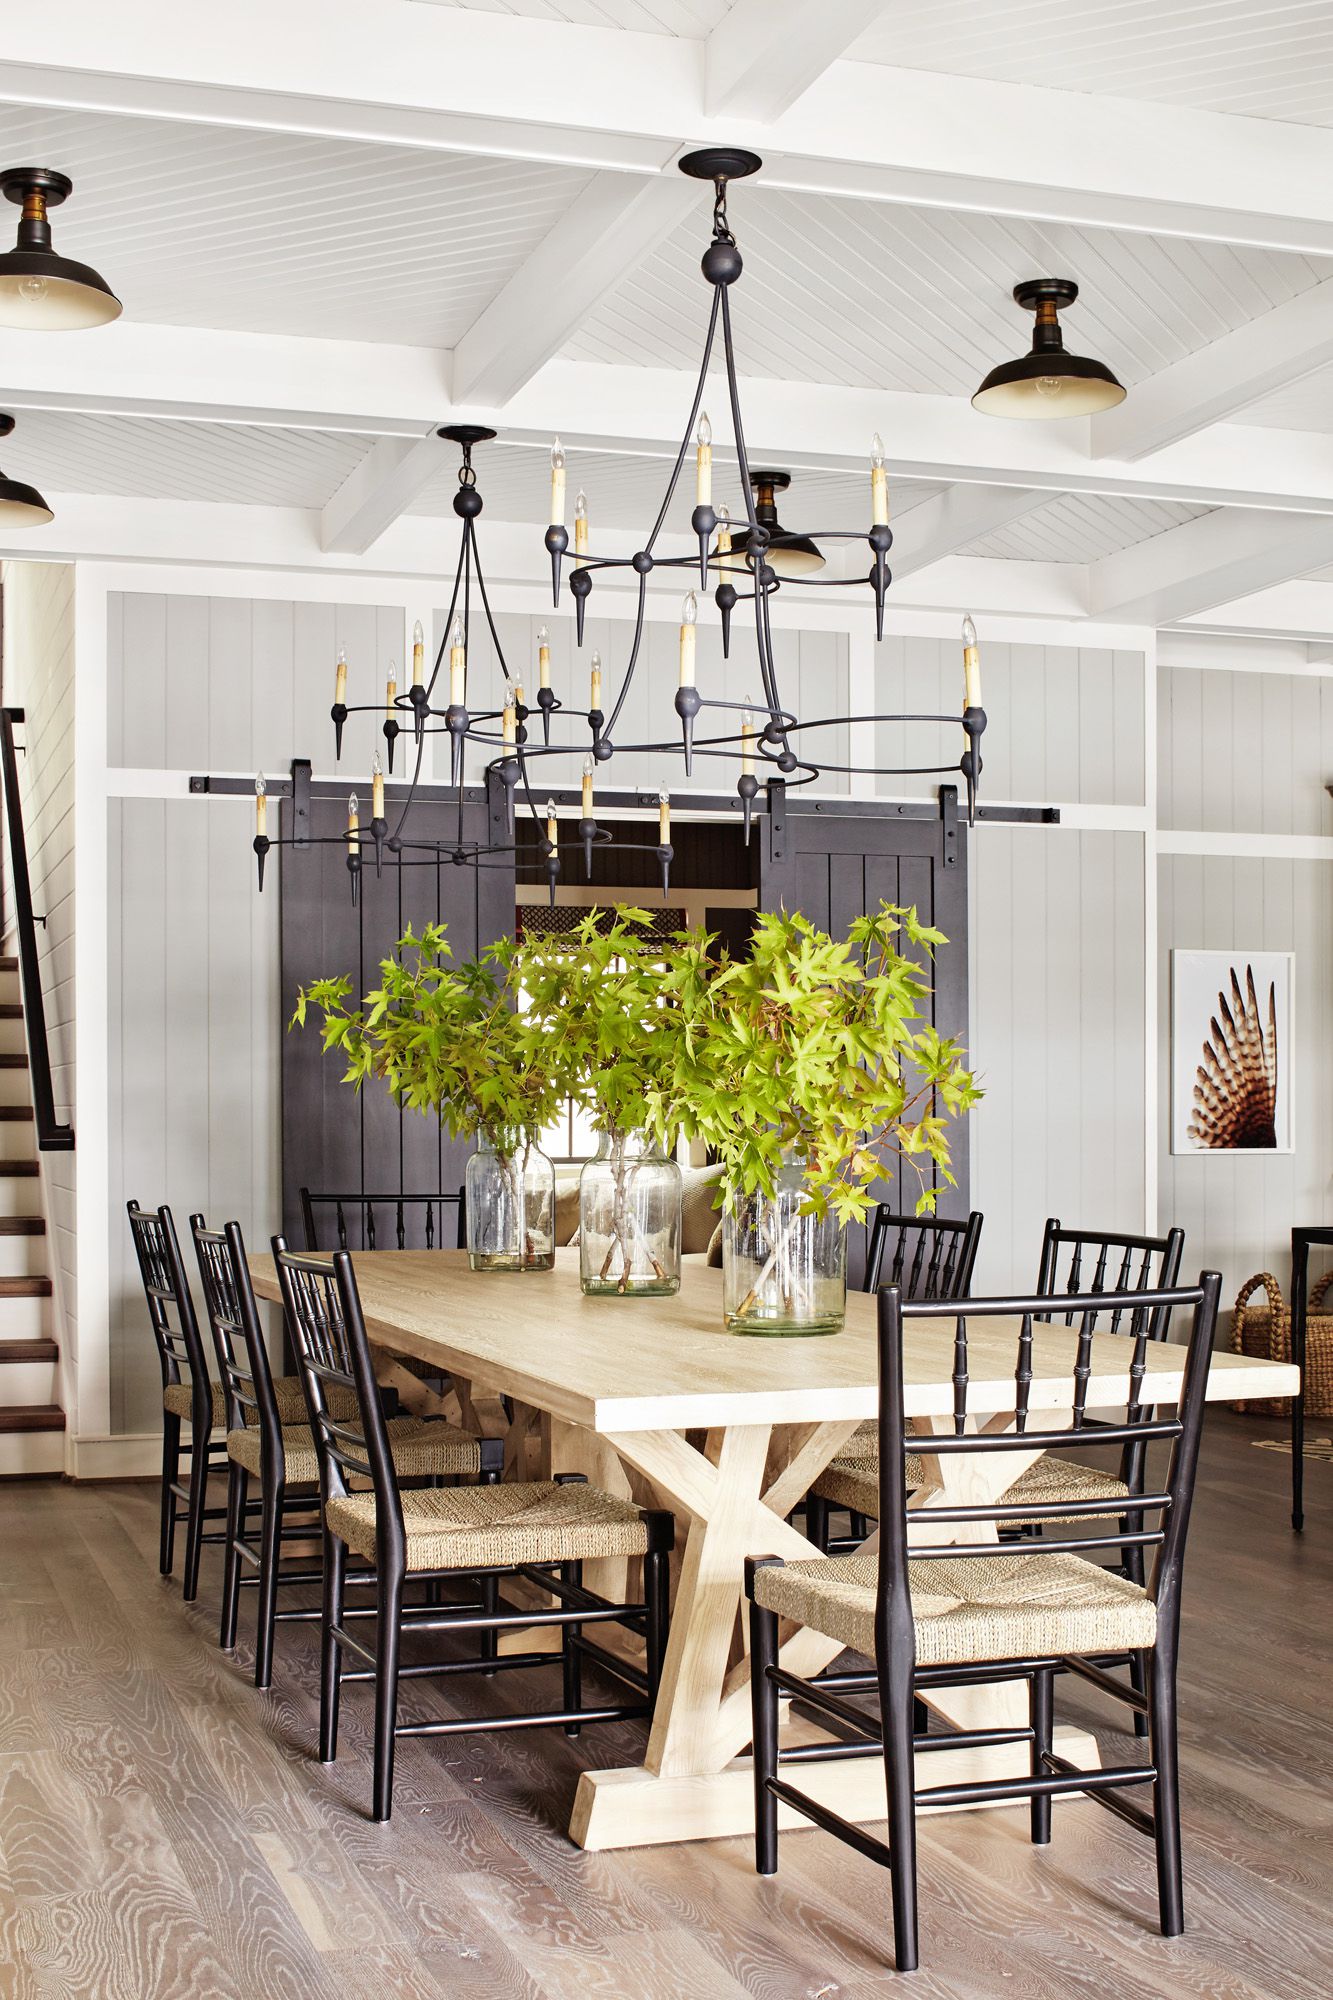 85 Best Dining Room Decorating Ideas - Country Dining Room Decor